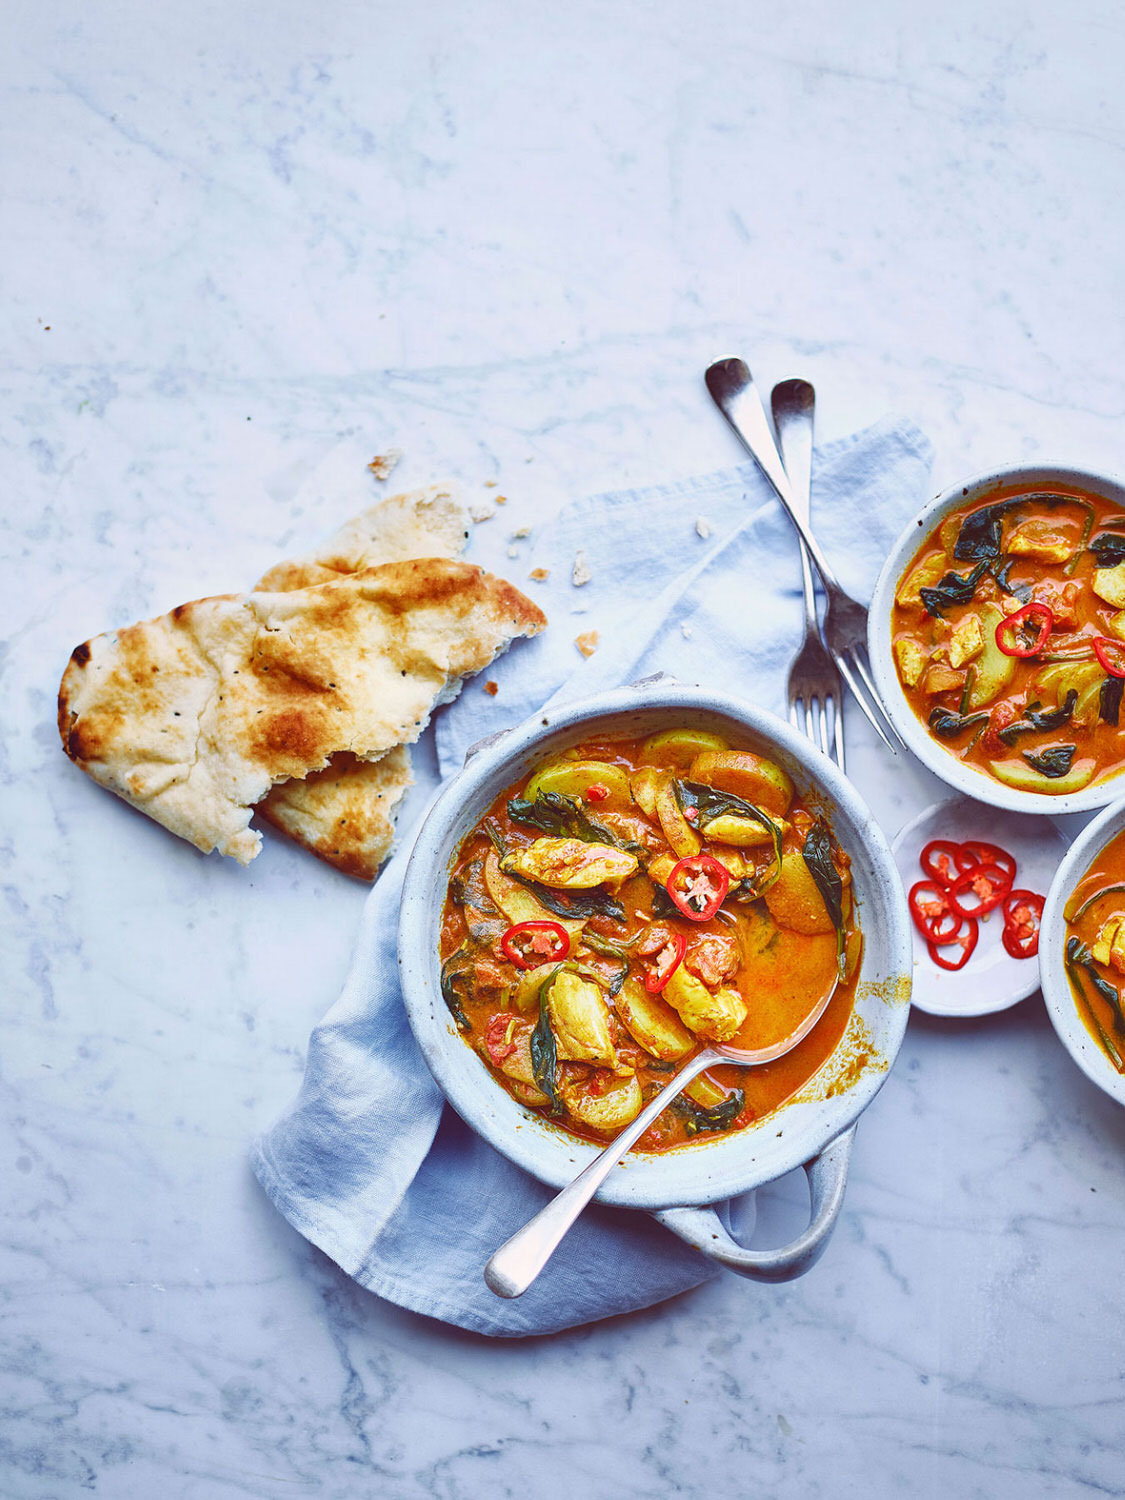 Fish curry served in ceramic curry bowls with naan breads